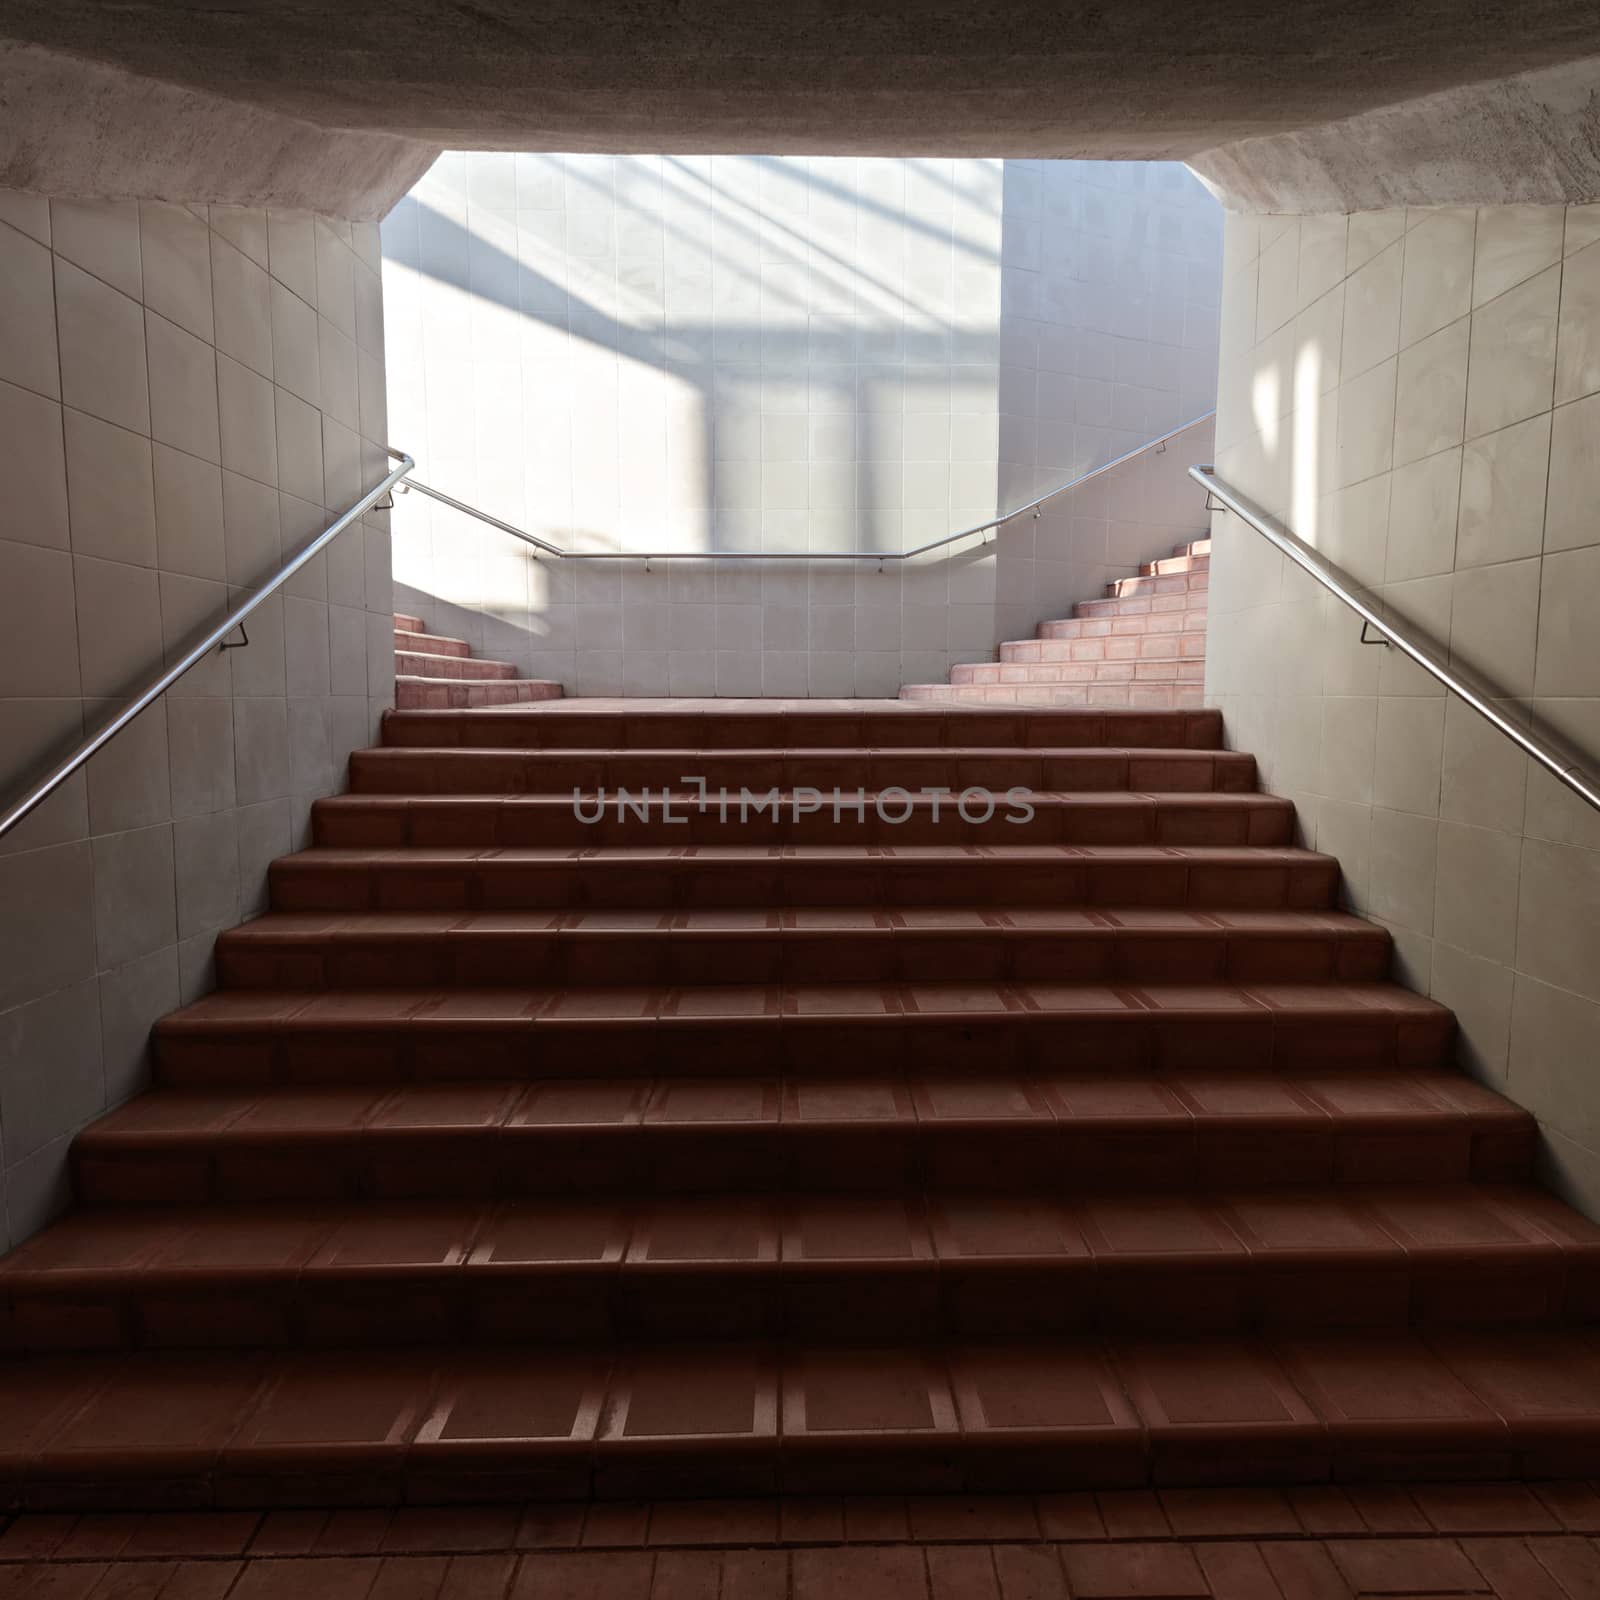 Climbing stairs, light in the underpass, there are no people.